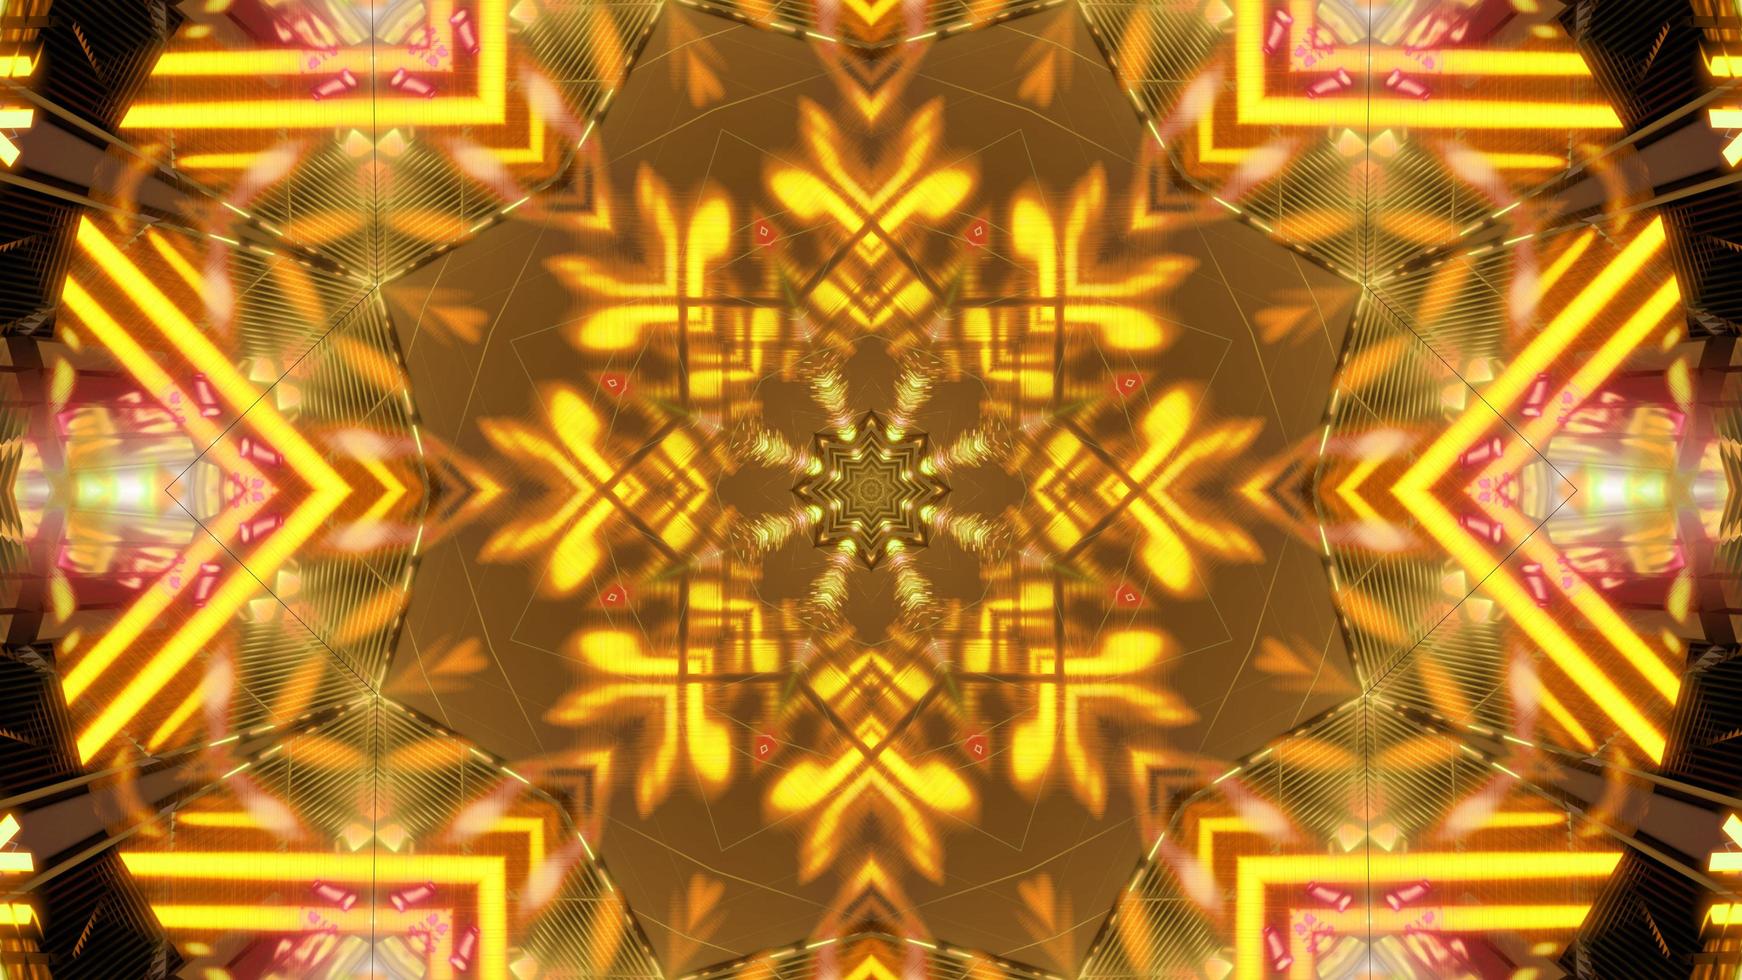 Red, yellow, and orange 3D kaleidoscope design illustration for background or wallpaper photo